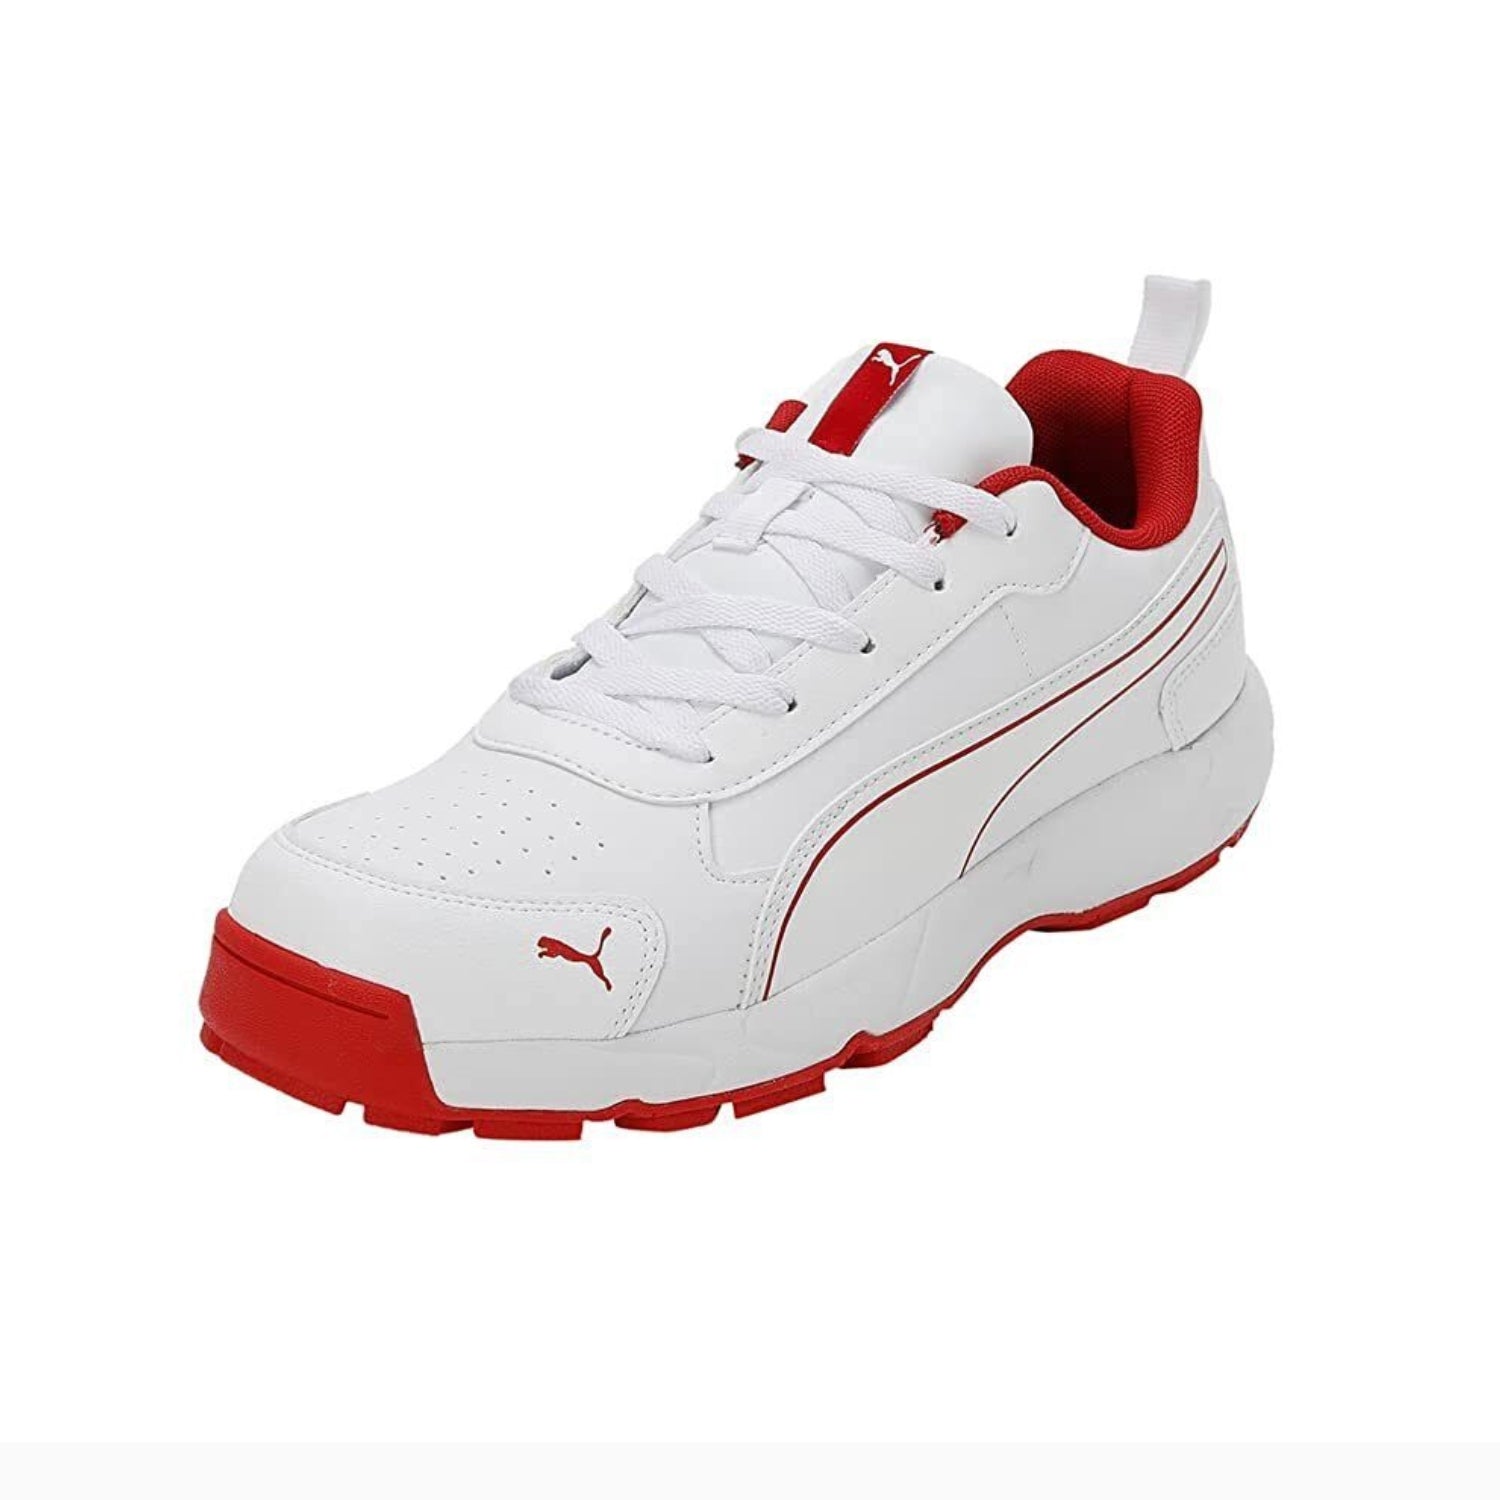 Puma Cricket Shoes, Model Classic Cat, White/Red